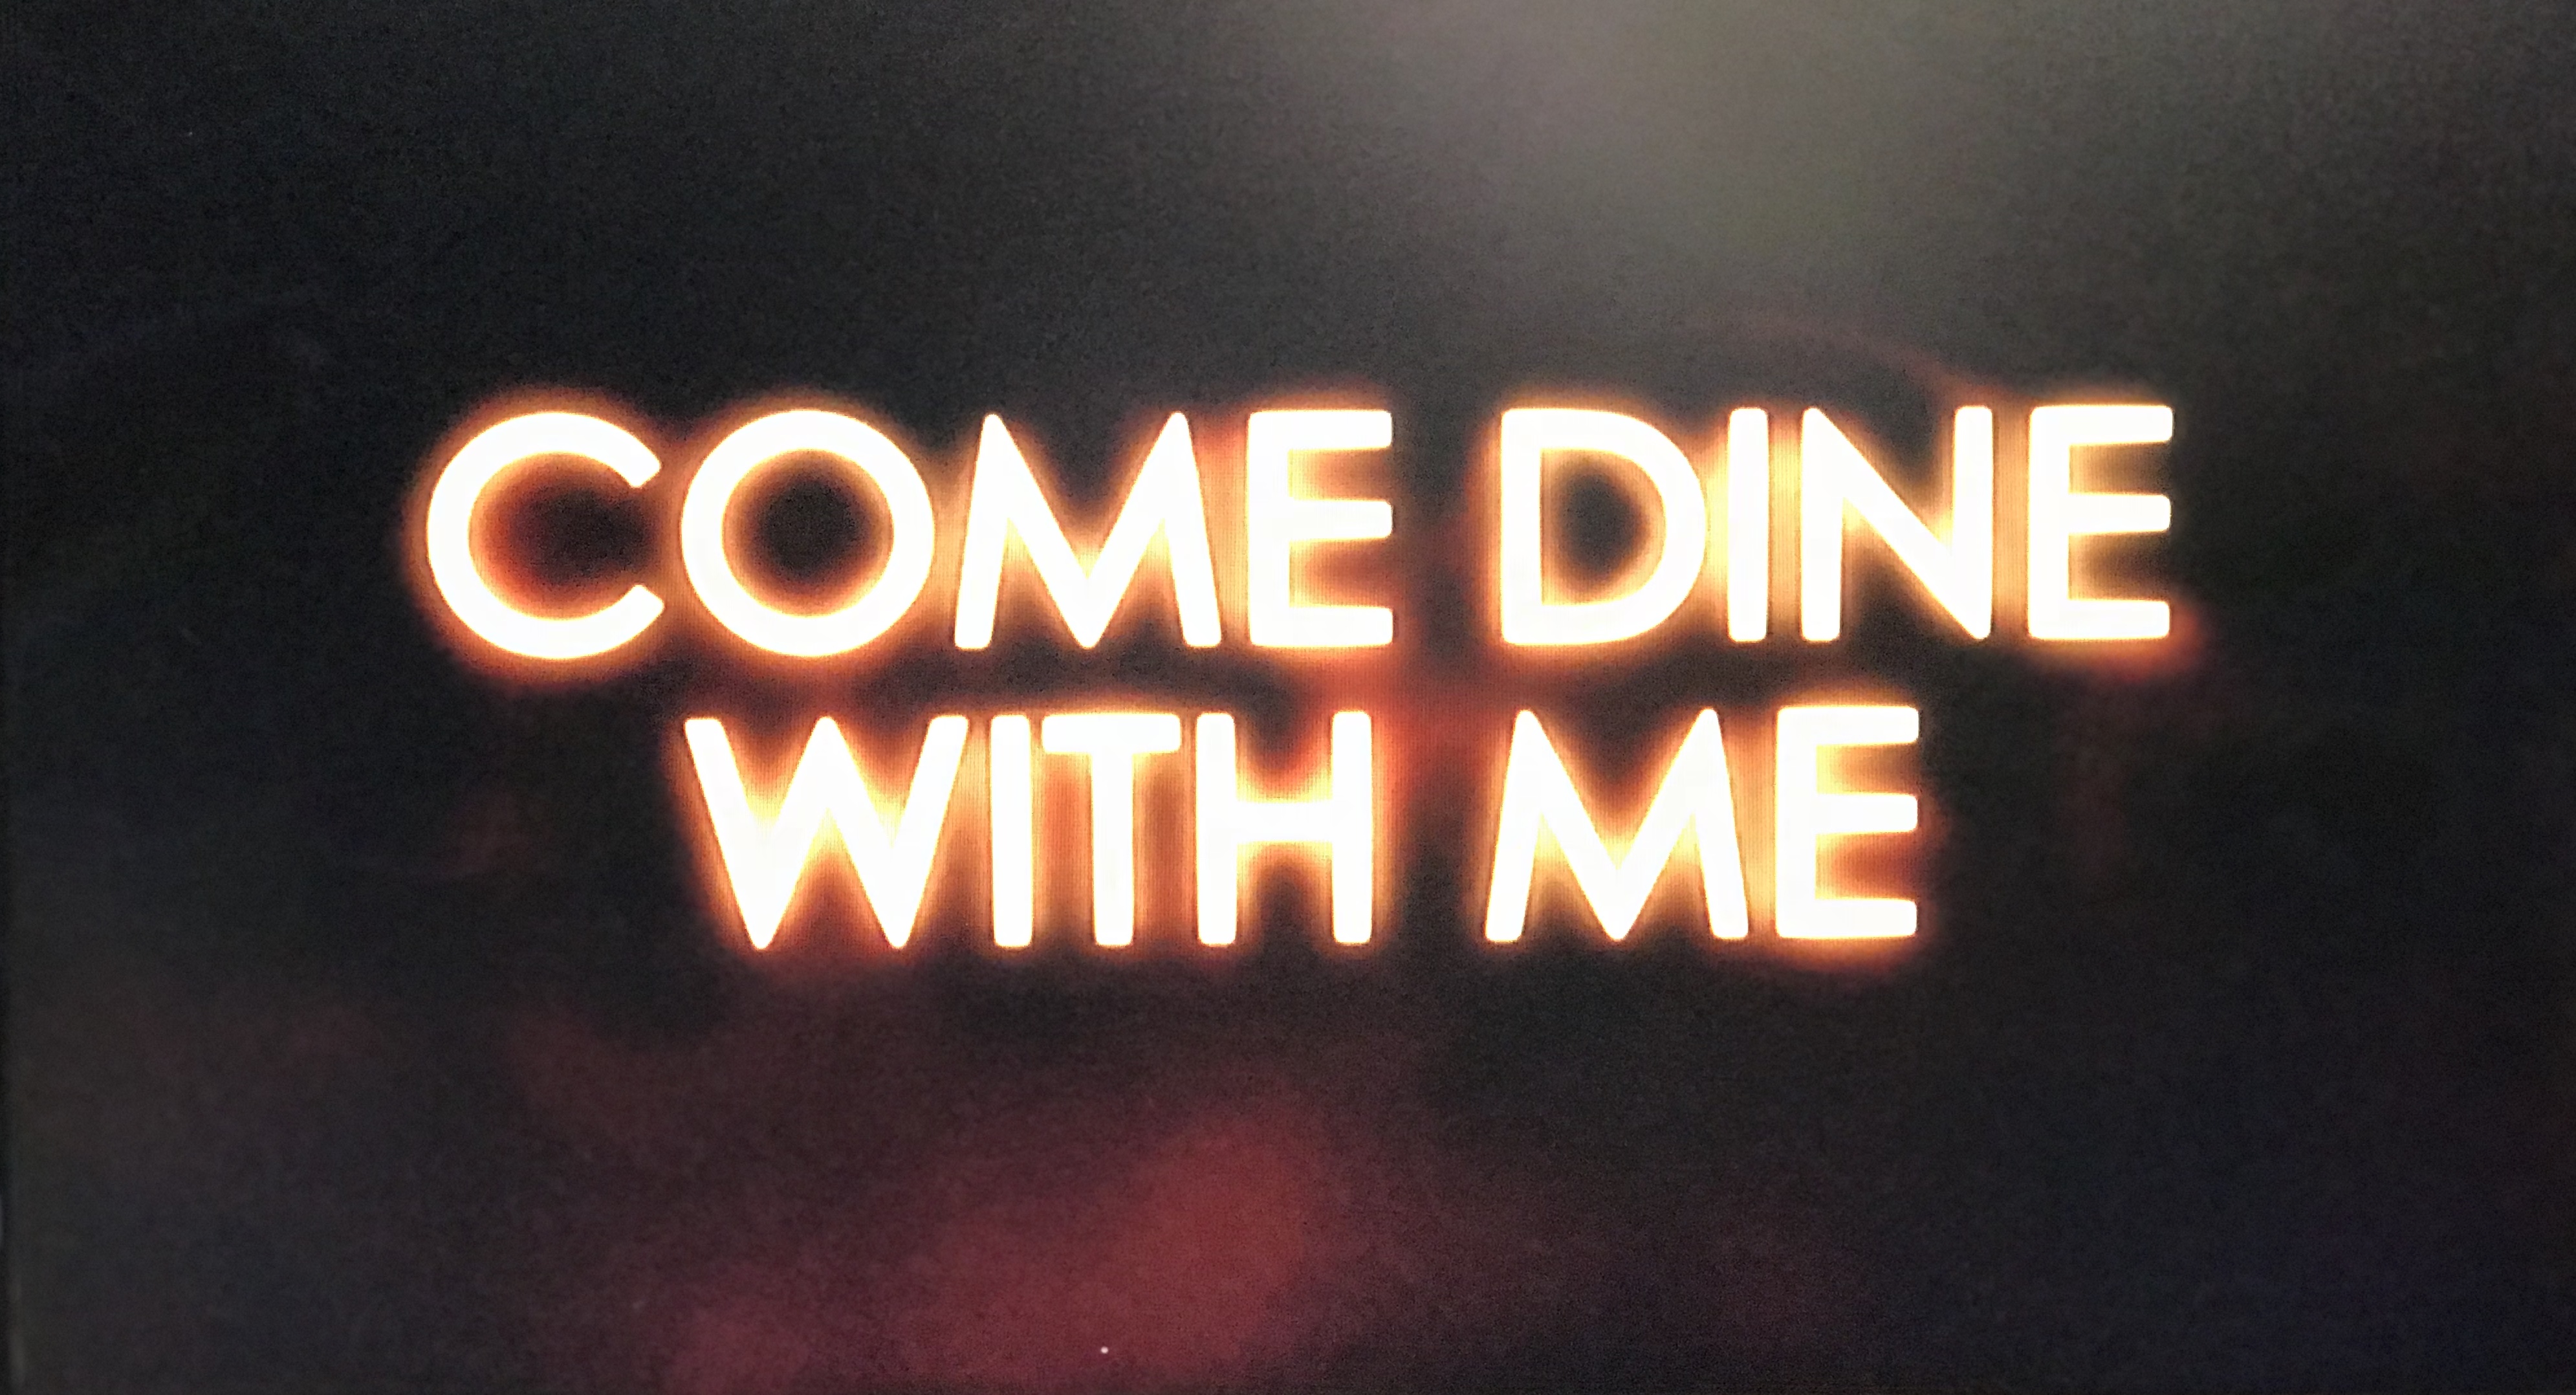 Come Dine With Me opening titles